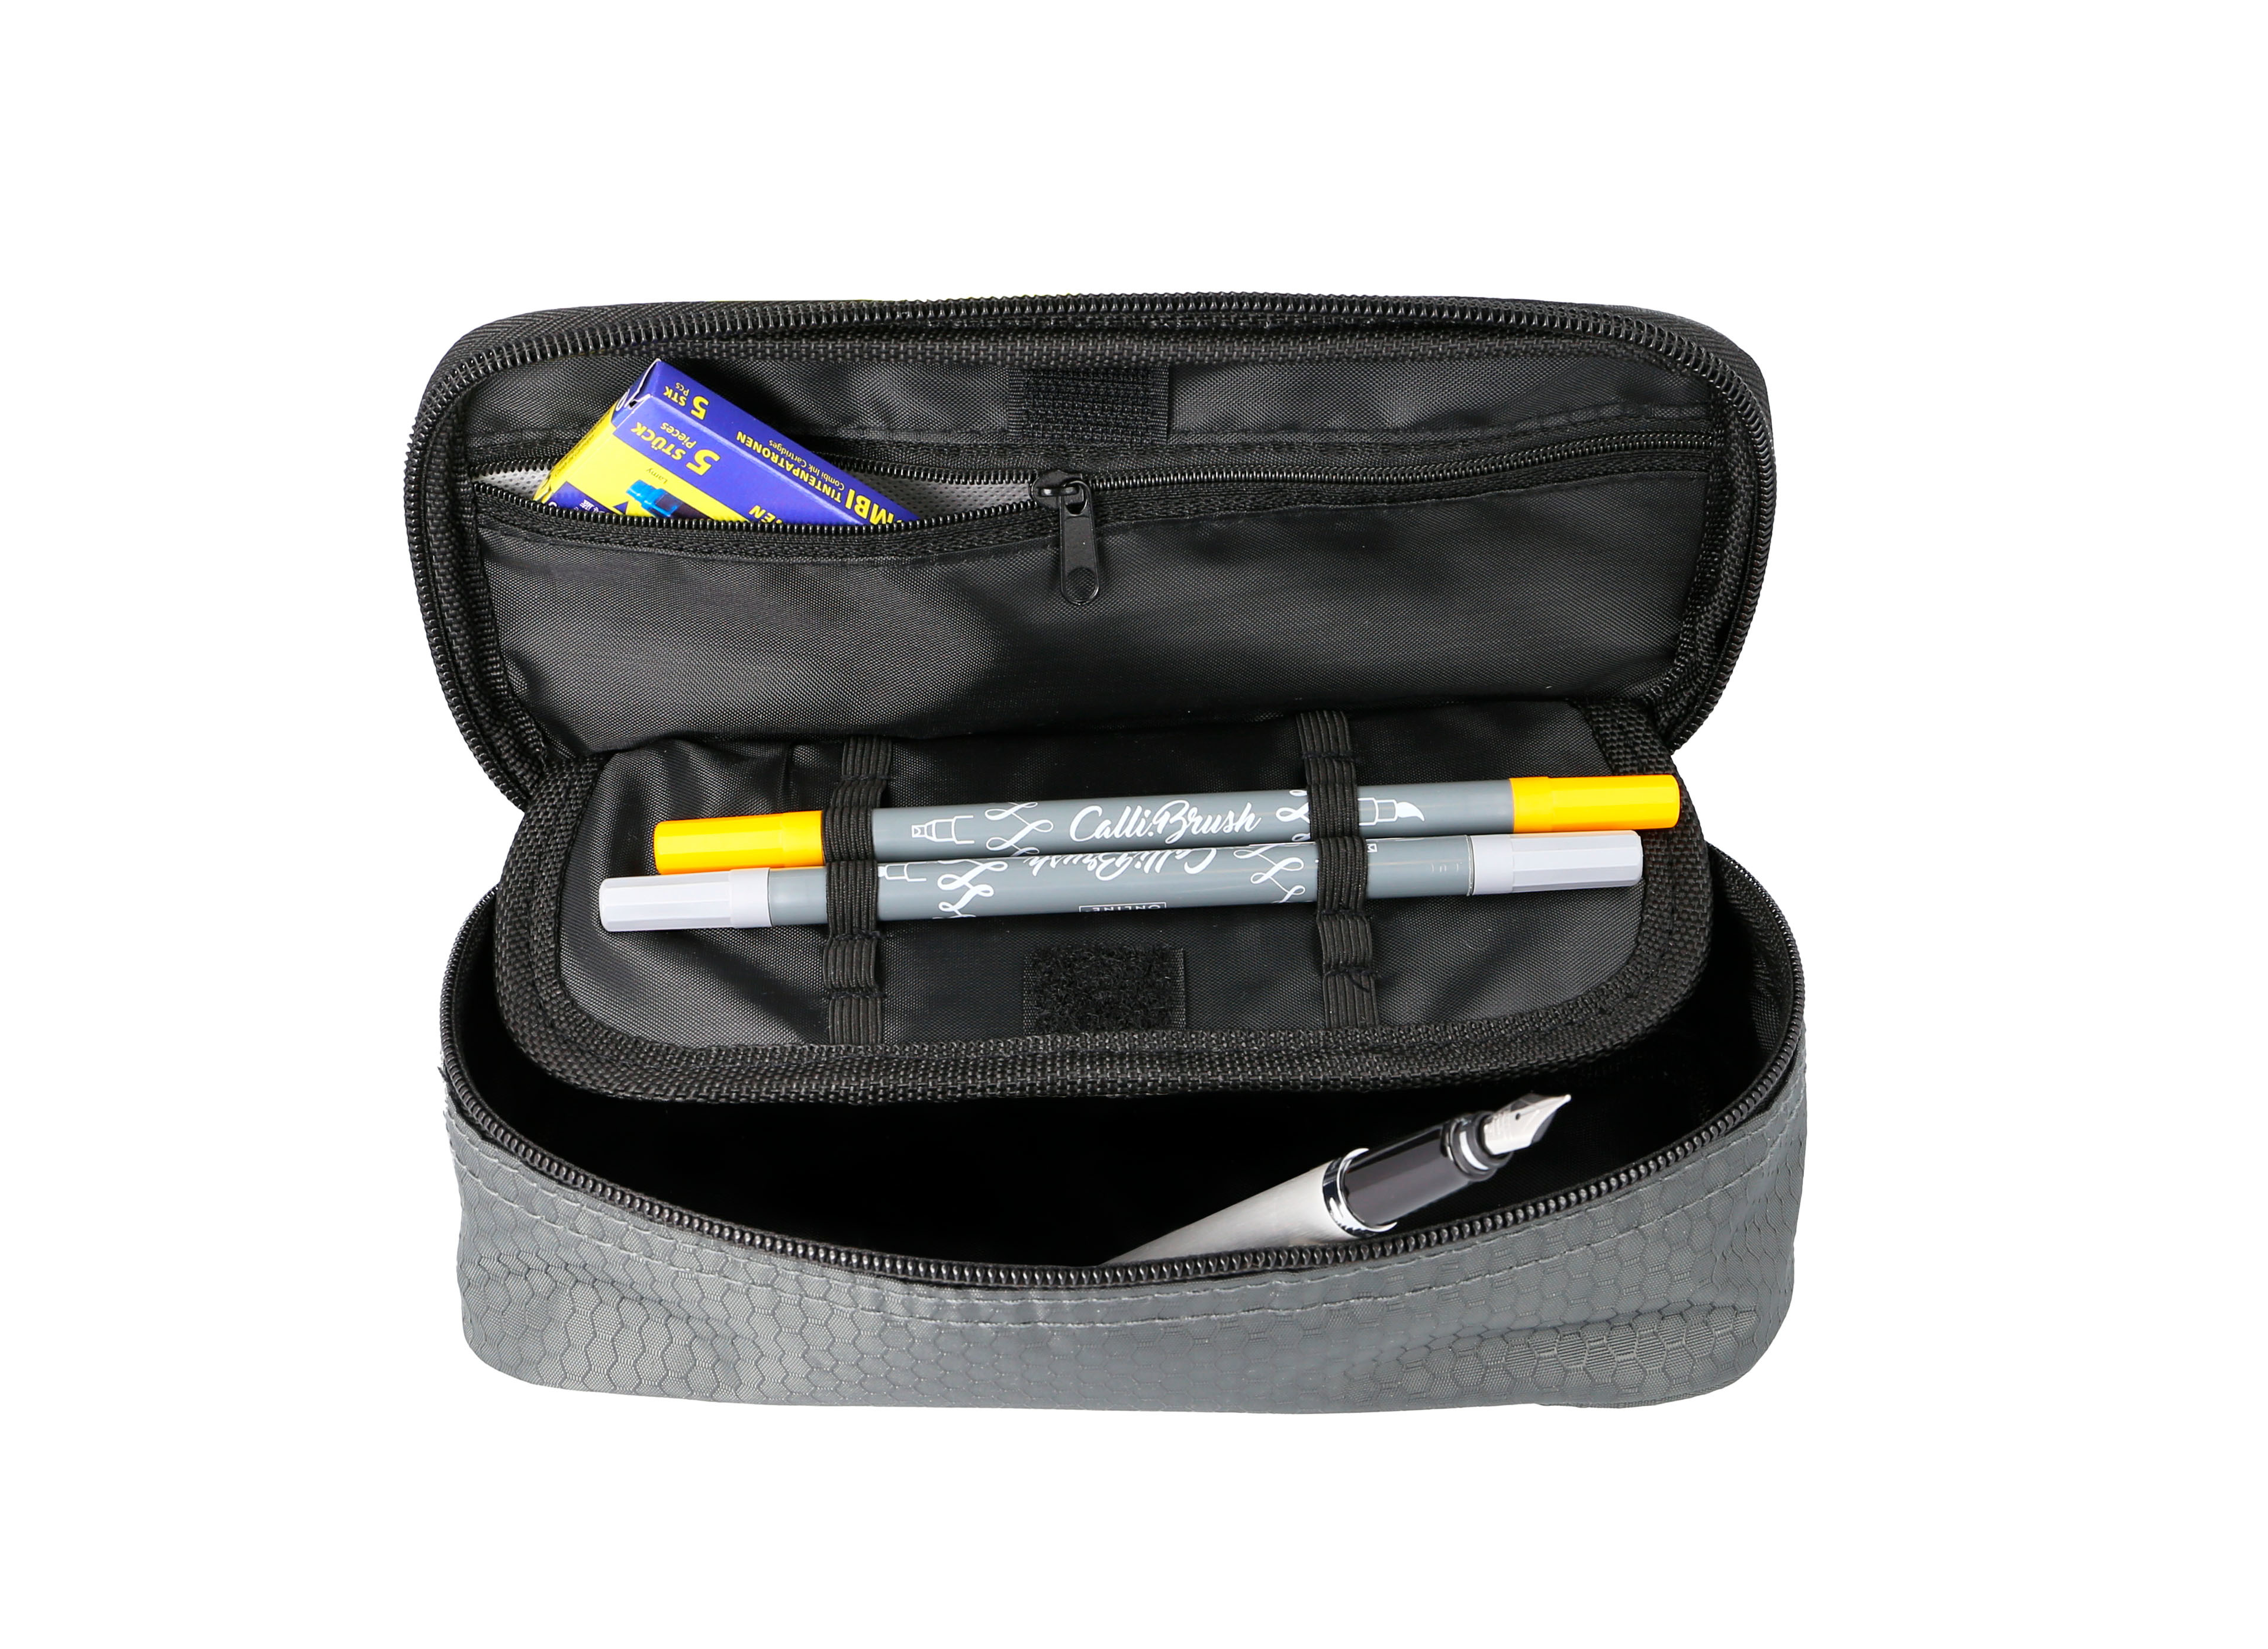 ONLINE Trousse Box Be.Safe 02278/6 anthracite